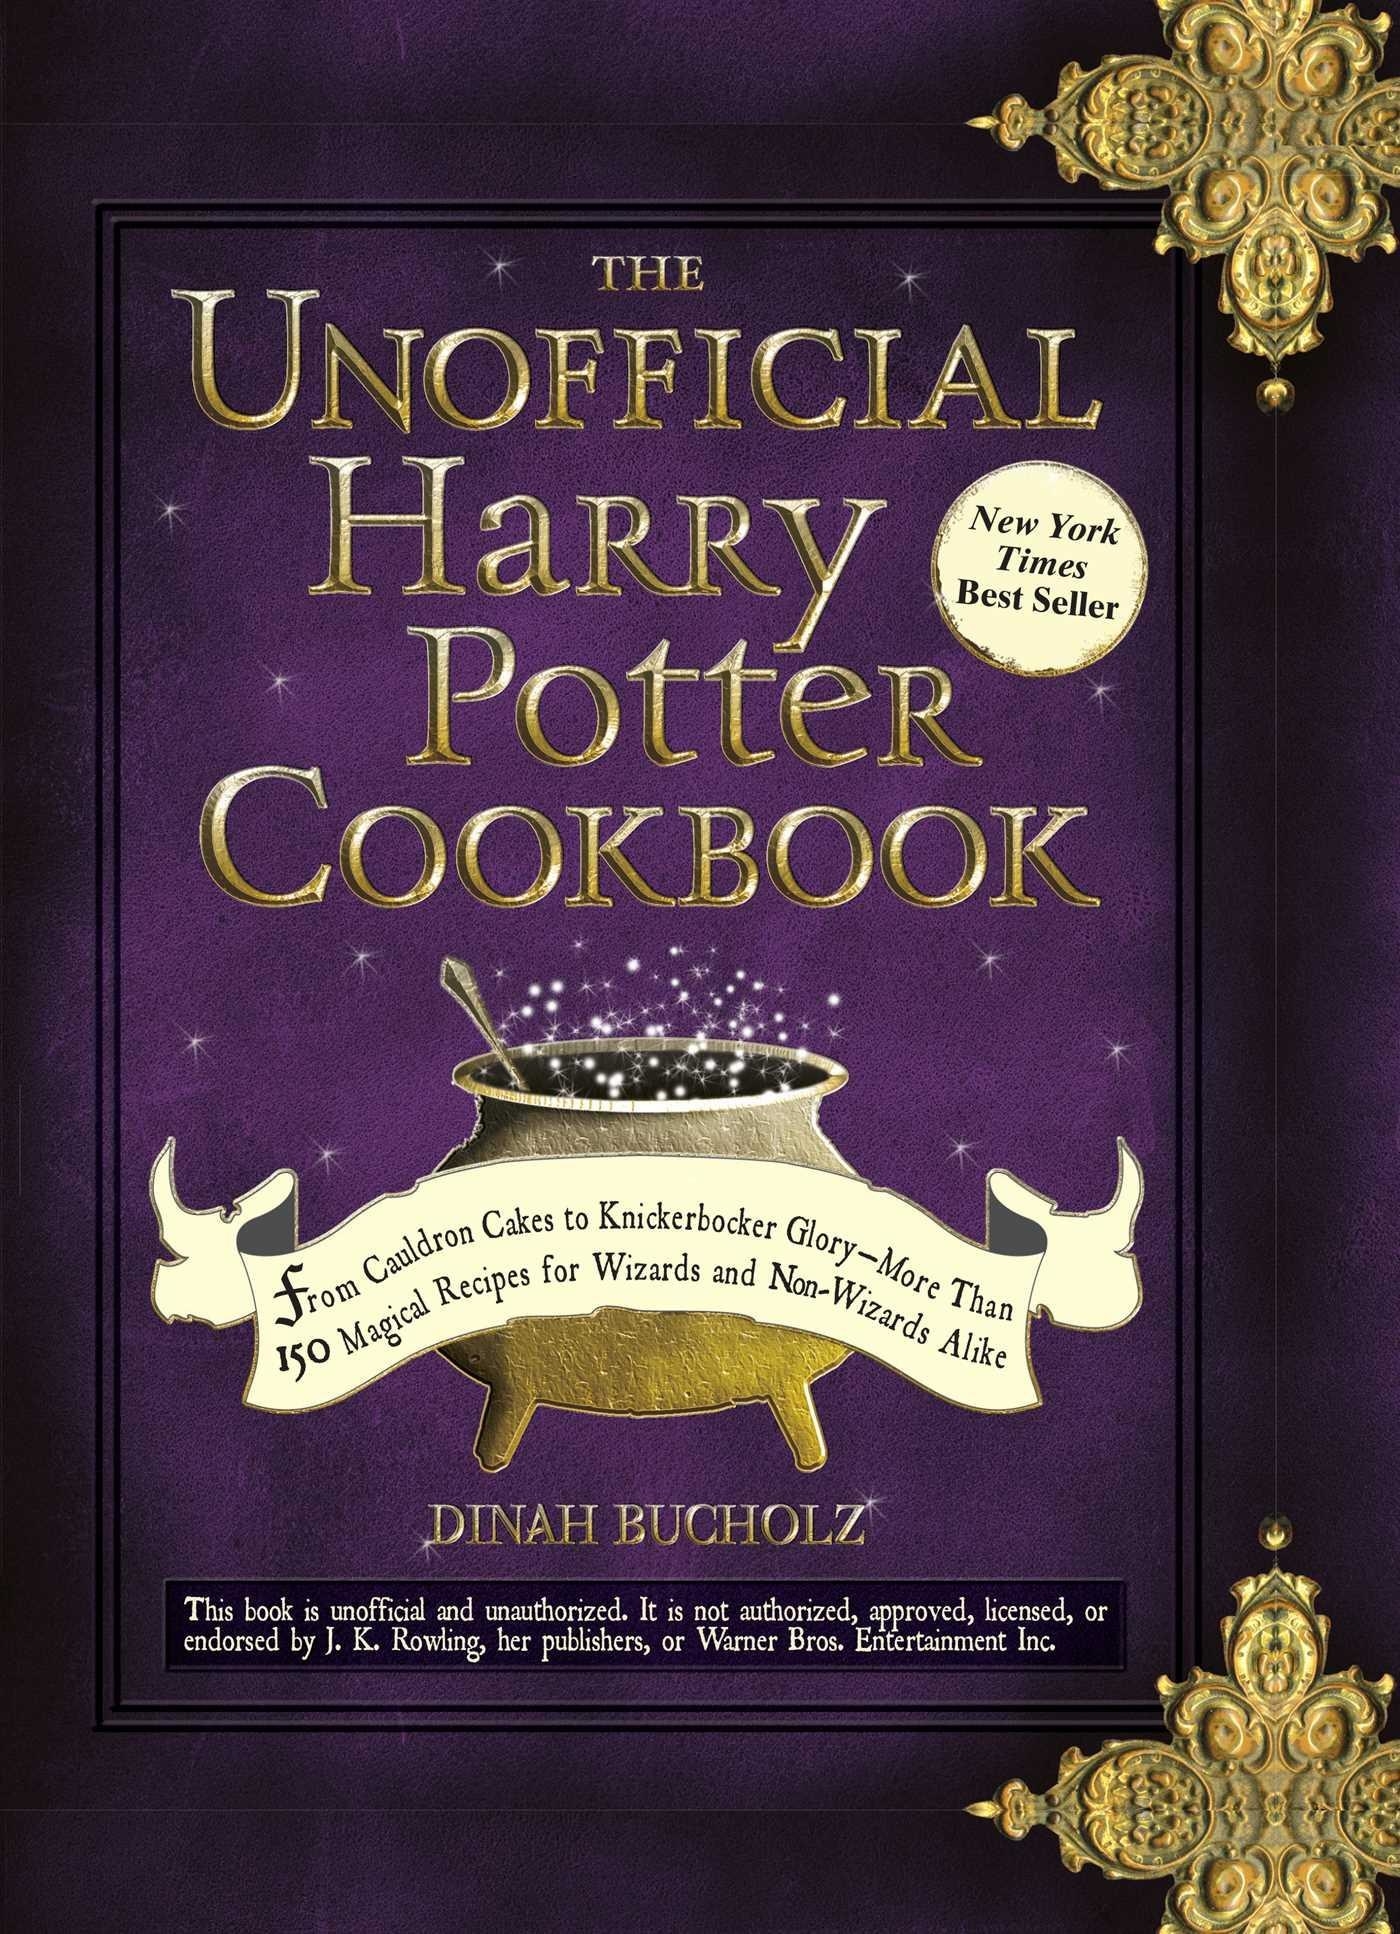 The cover of the cookbook